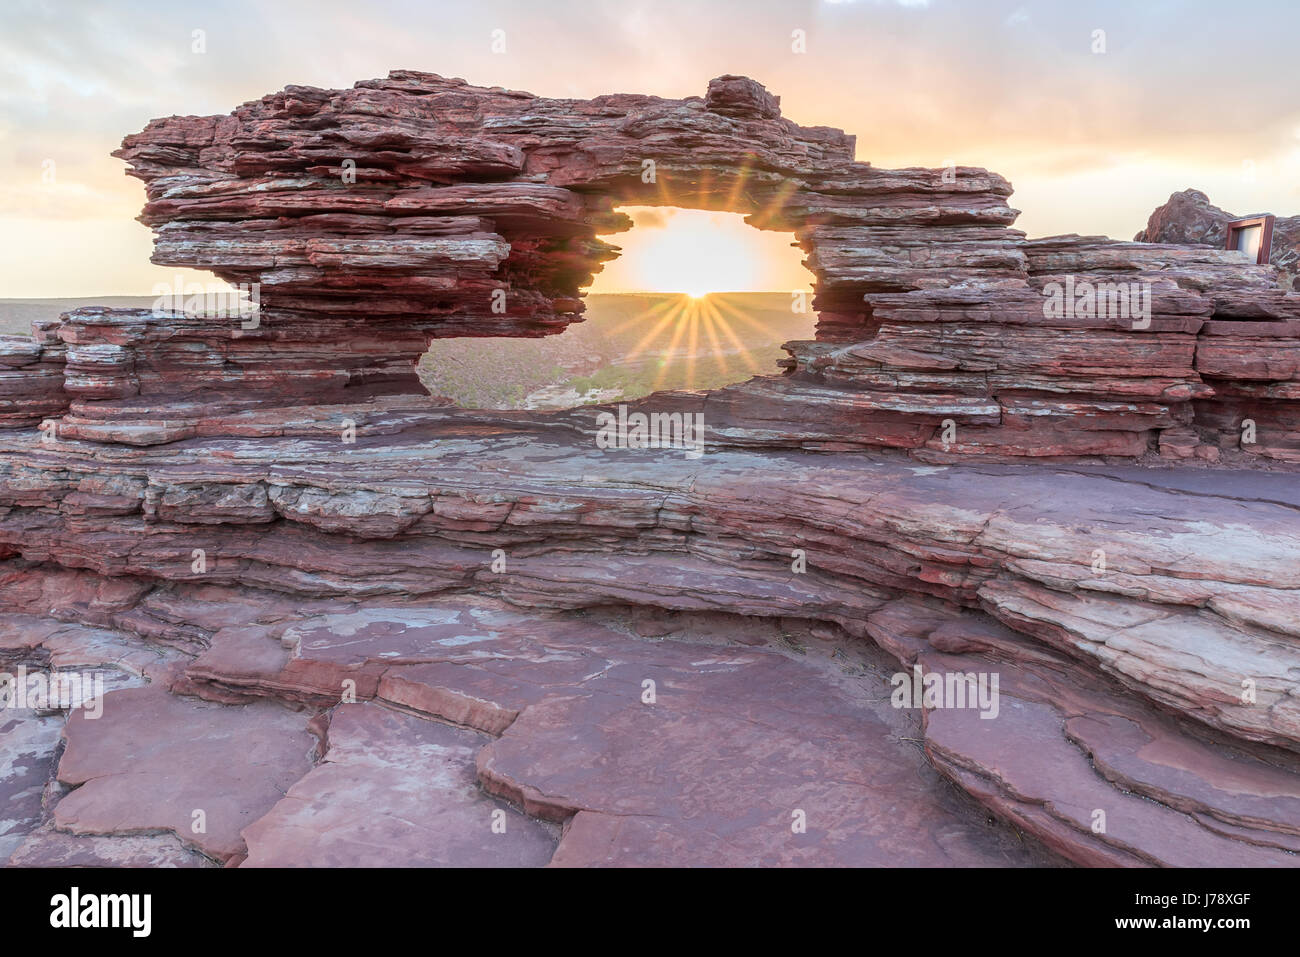 The magnificent landscape of Kalbarri National Park at Australia during sunrise, viewed from Nature's Window with the backdrop of Murchison River. Stock Photo